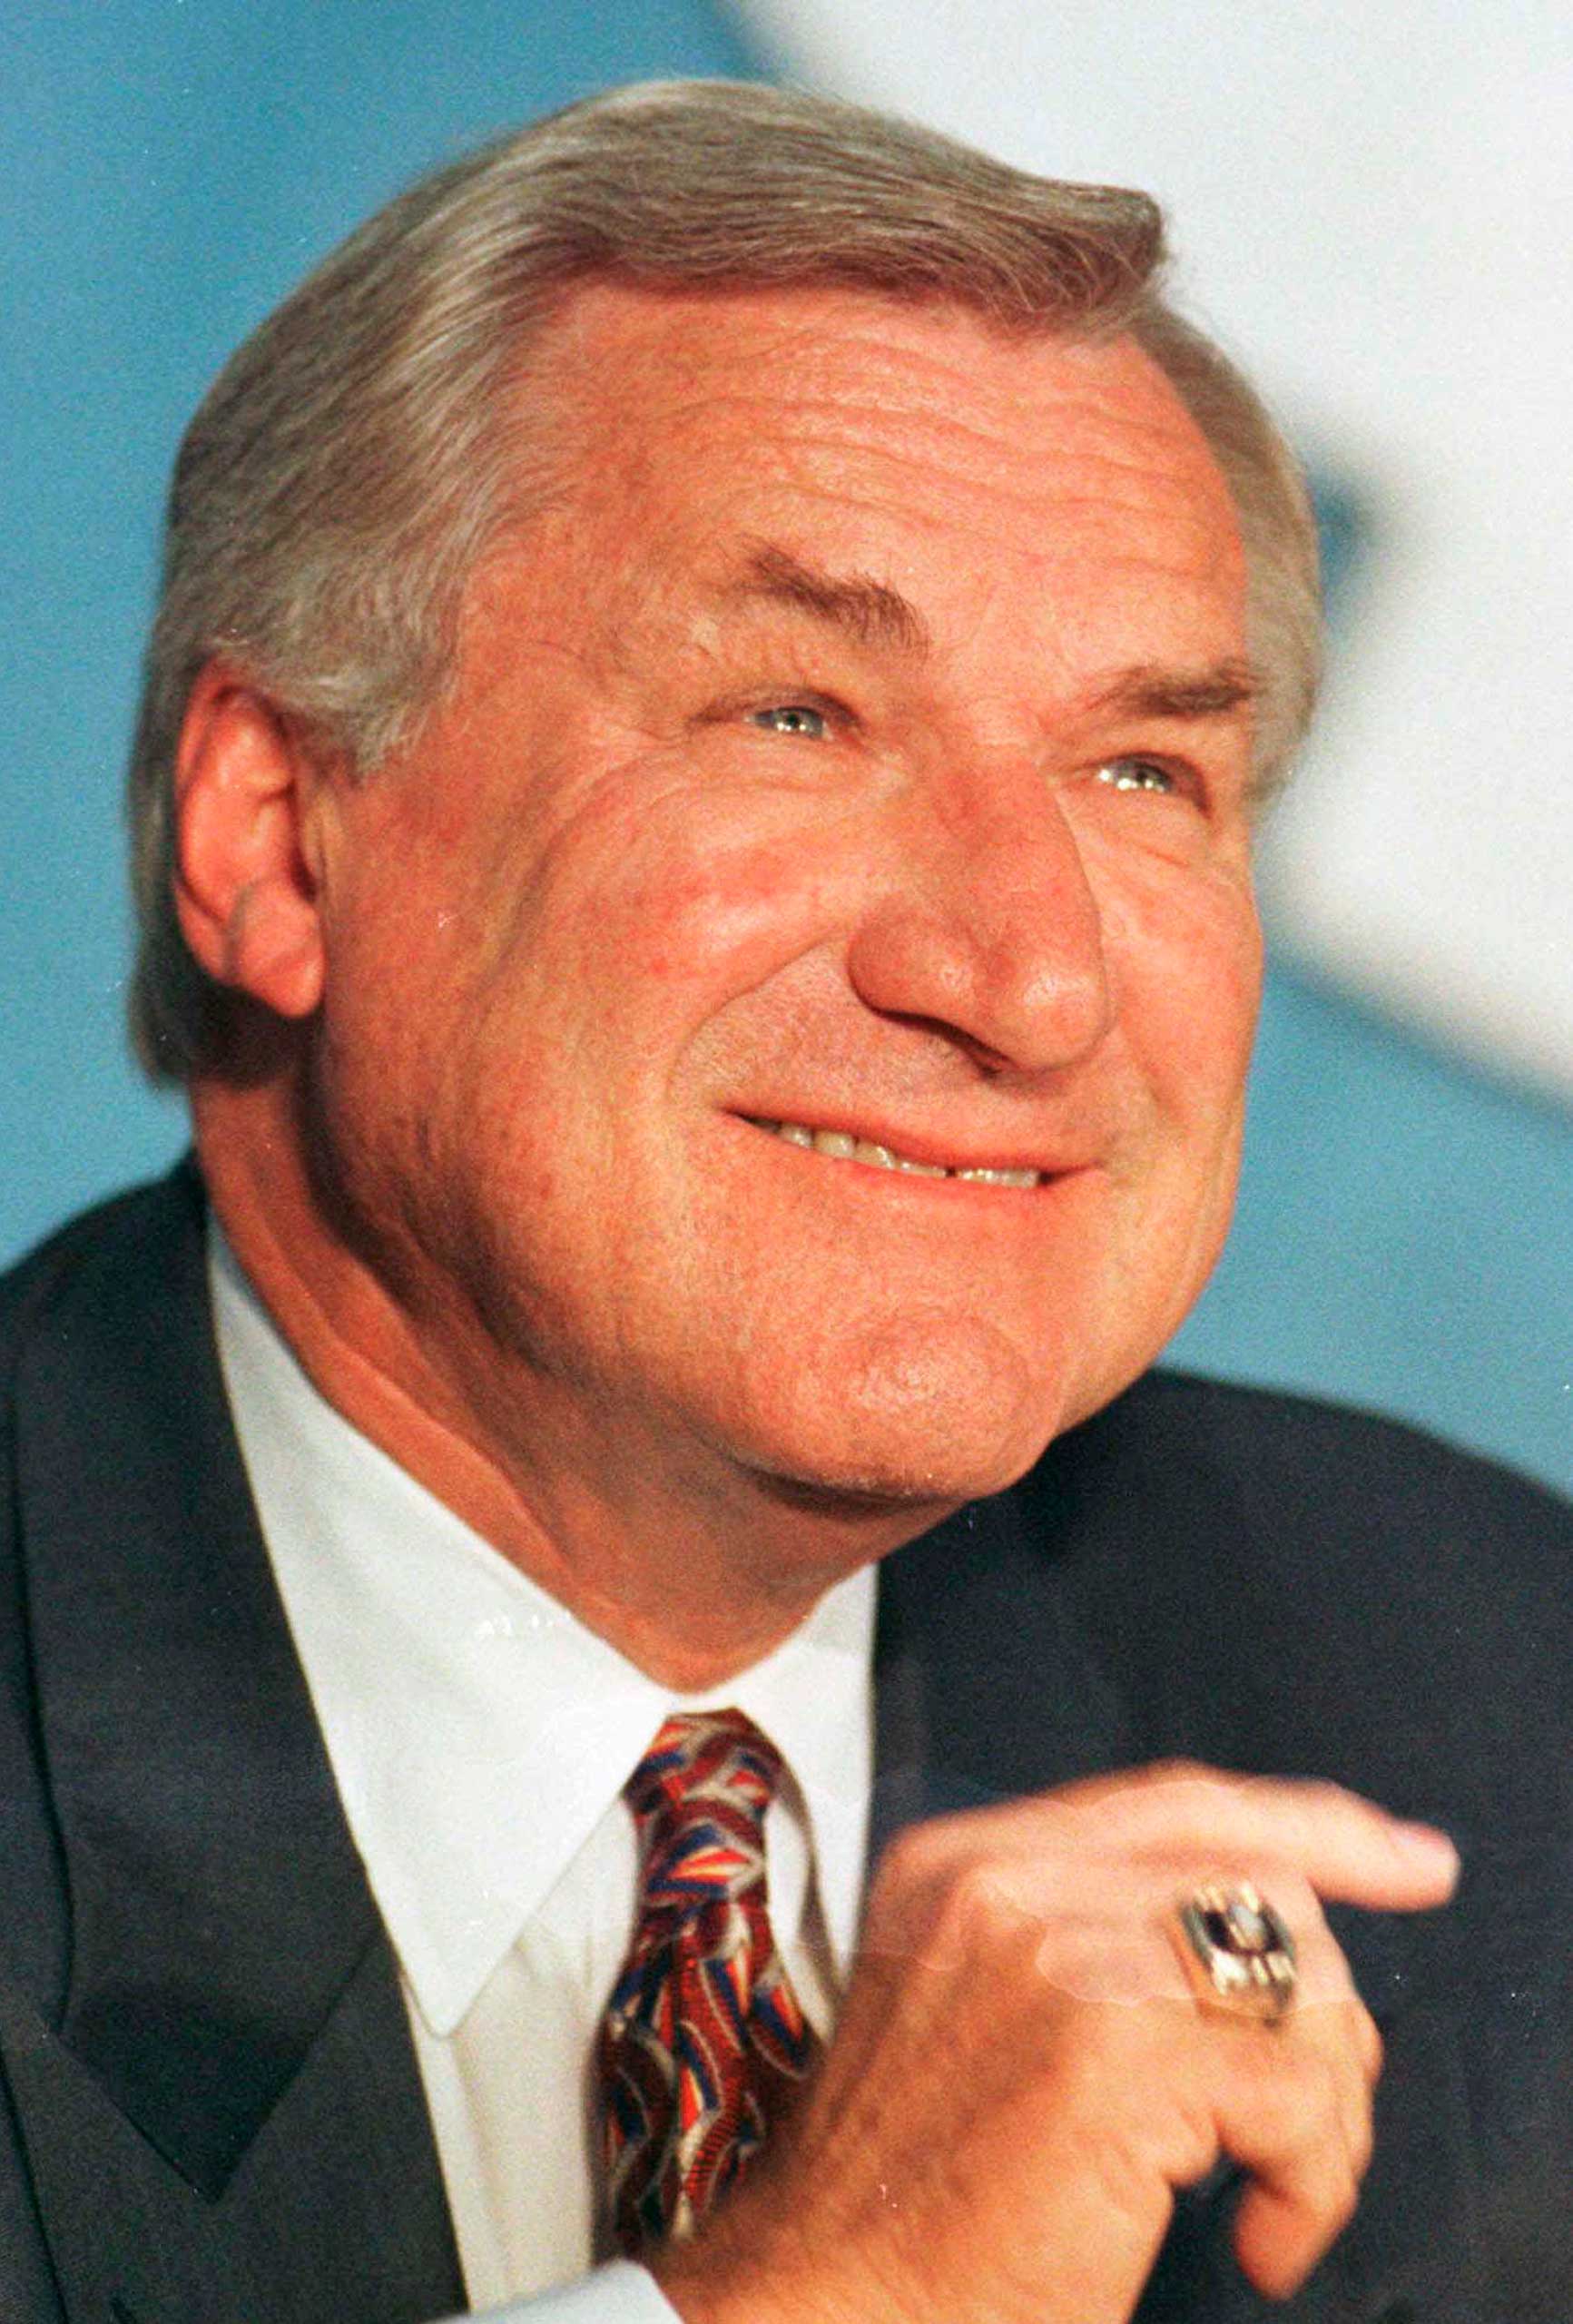 North Carolina basketball coach Dean Smith during a news conference where he announced his retirement, in Chapel Hill, N.C. on Oct. 9, 1997.